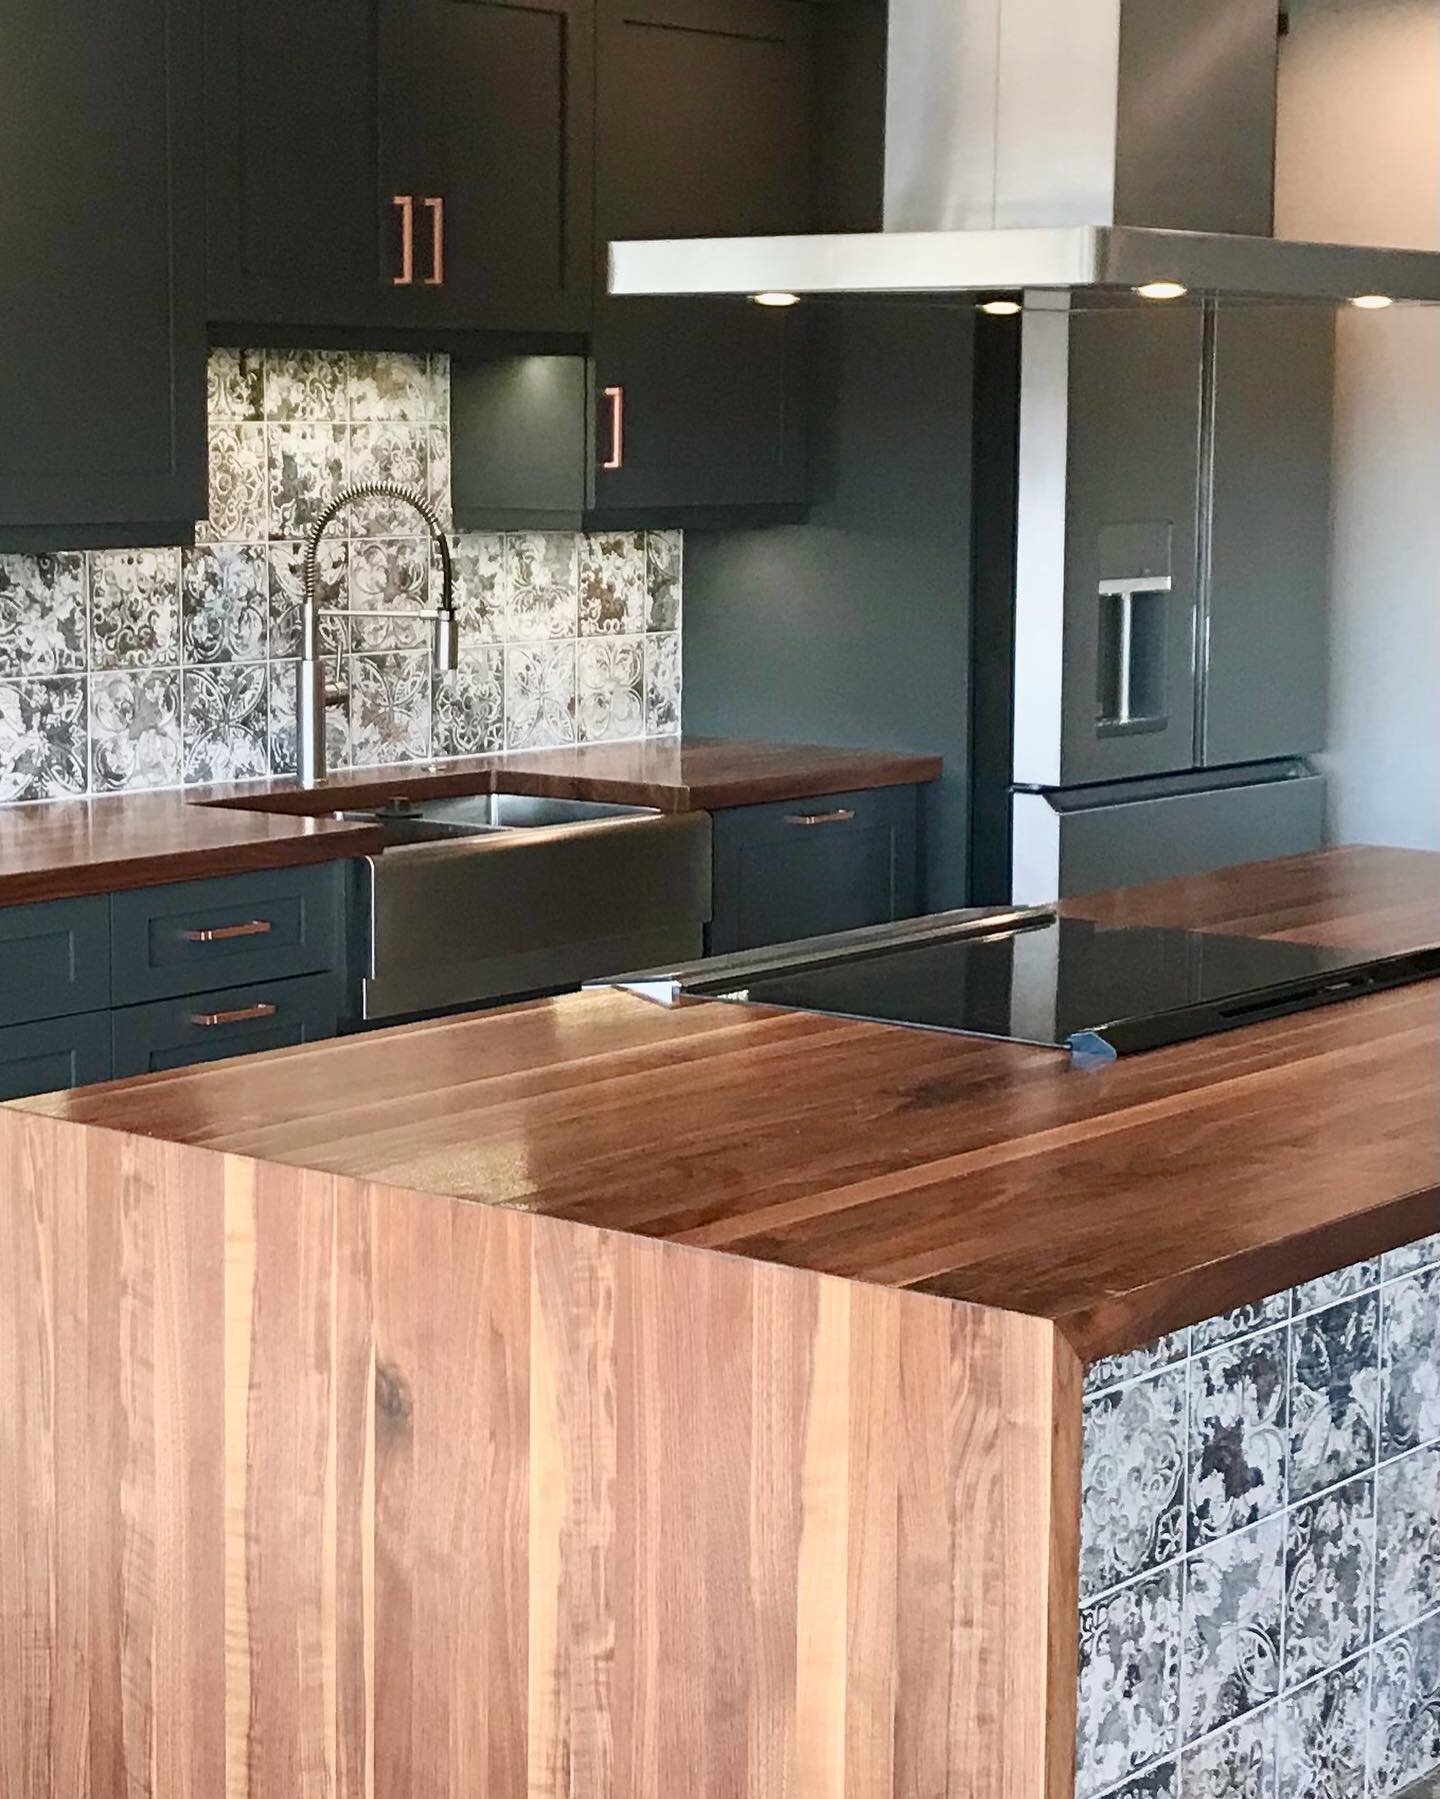 Turning this Country Club Plaza penthouse condo into an open concept floor plan took some maneuvering but the end result is stunning. This kitchen features striking graphite cabinetry, solid walnut waterfall countertops and copper accents. The graphi